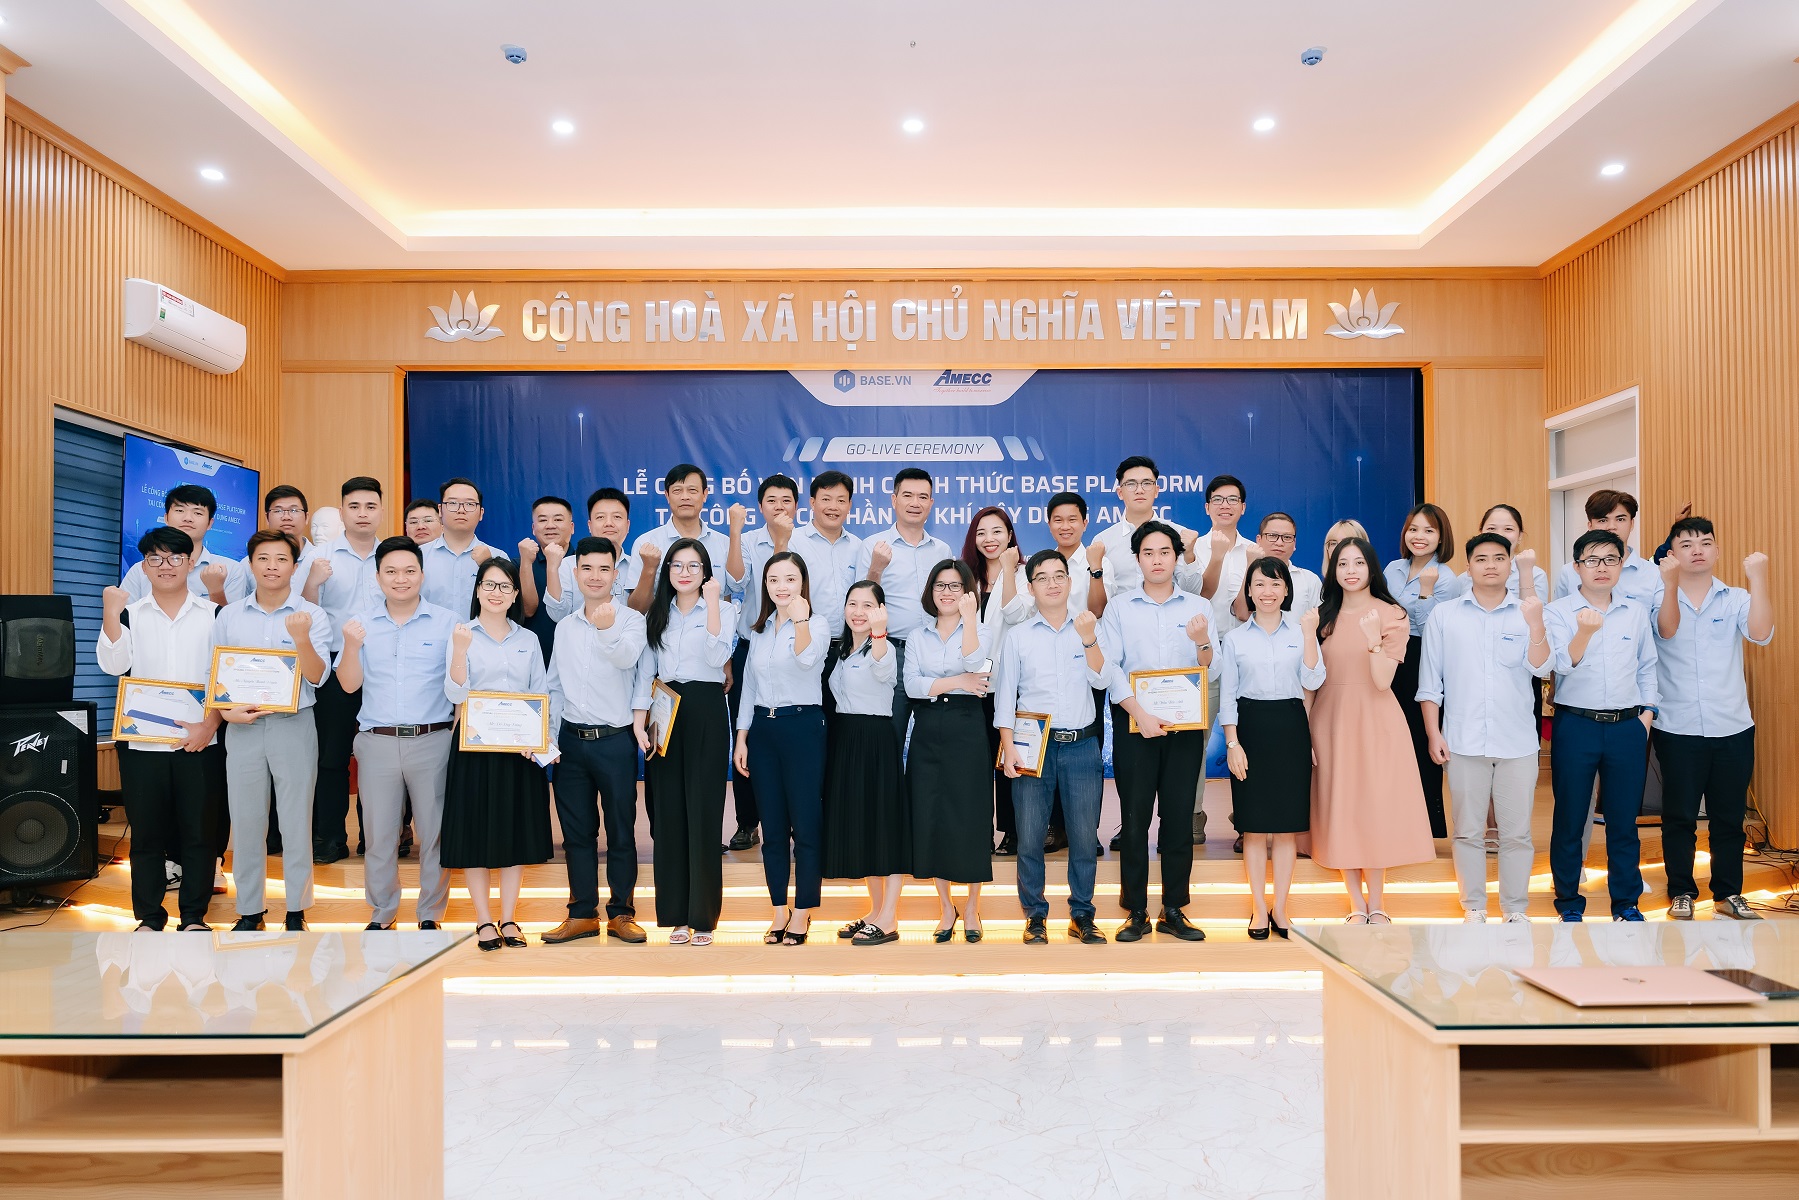 The official launch ceremony of the base platform operation at amecc mechanical construction joint stock company: A significant digital transformation journey to overcome